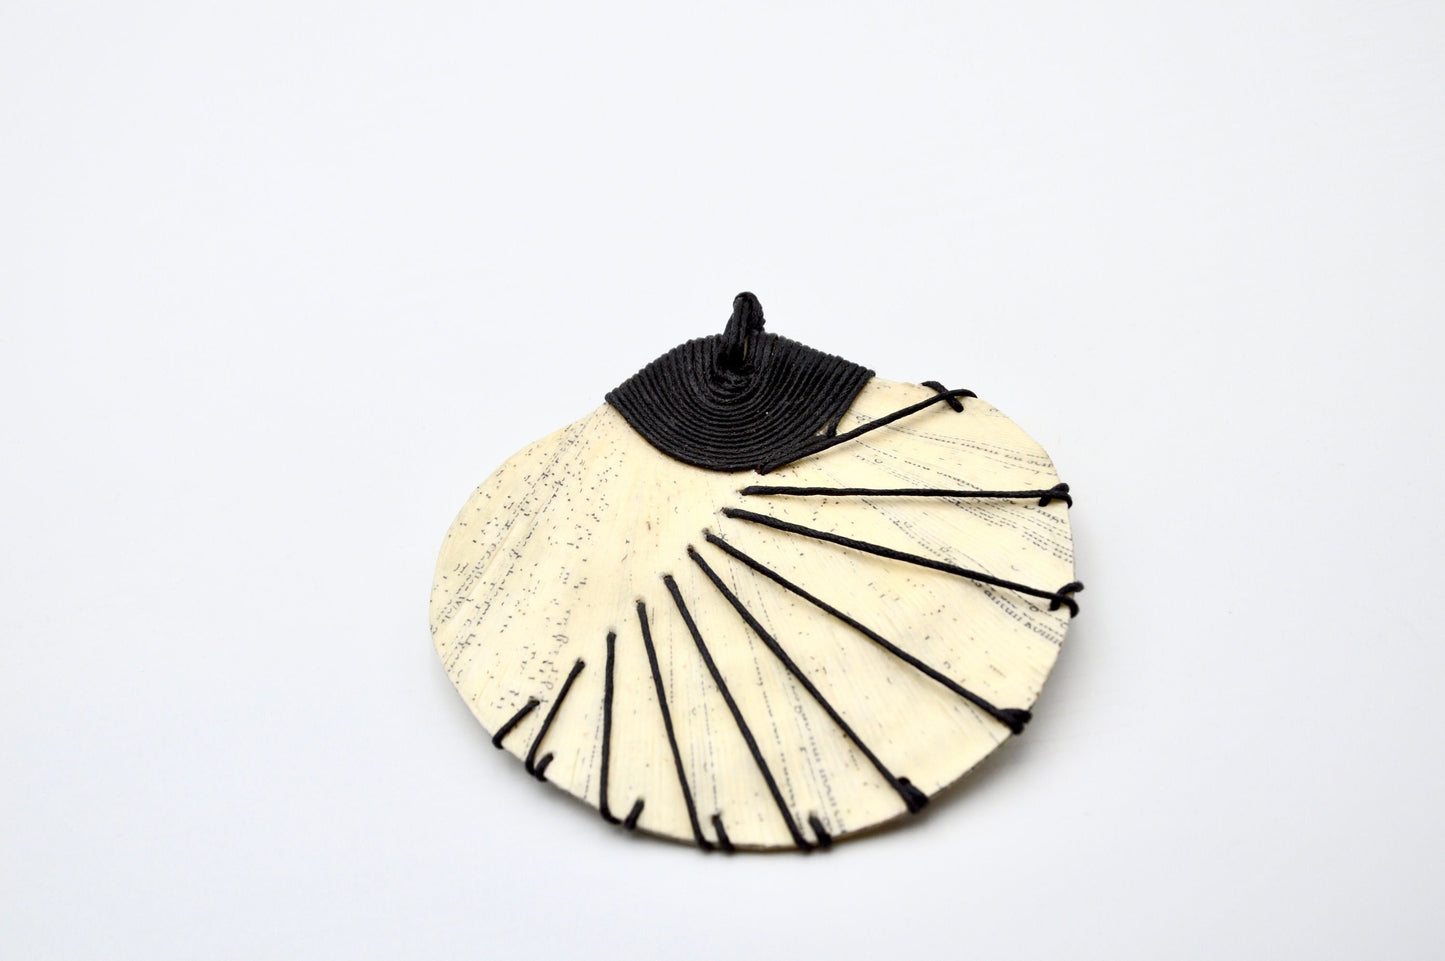 Round book pendant - made of Book Pages - Art Paper necklace